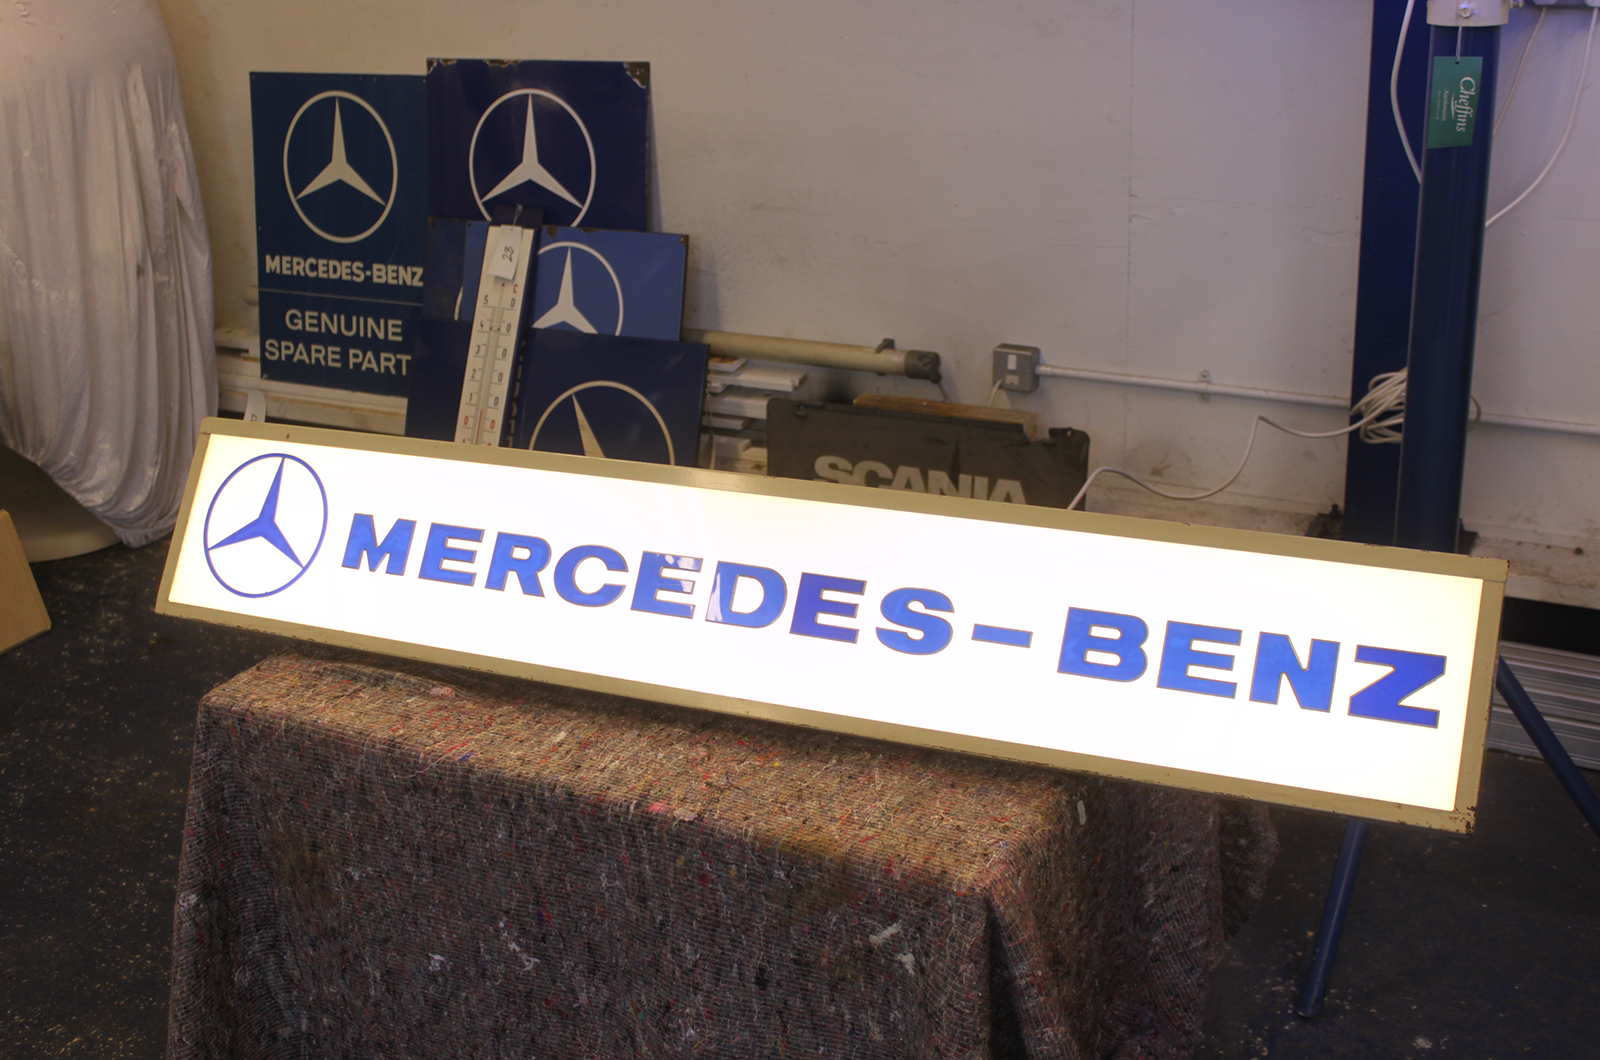 Classic & Sports Car – This is the Mercedes automobilia sale of your dreams